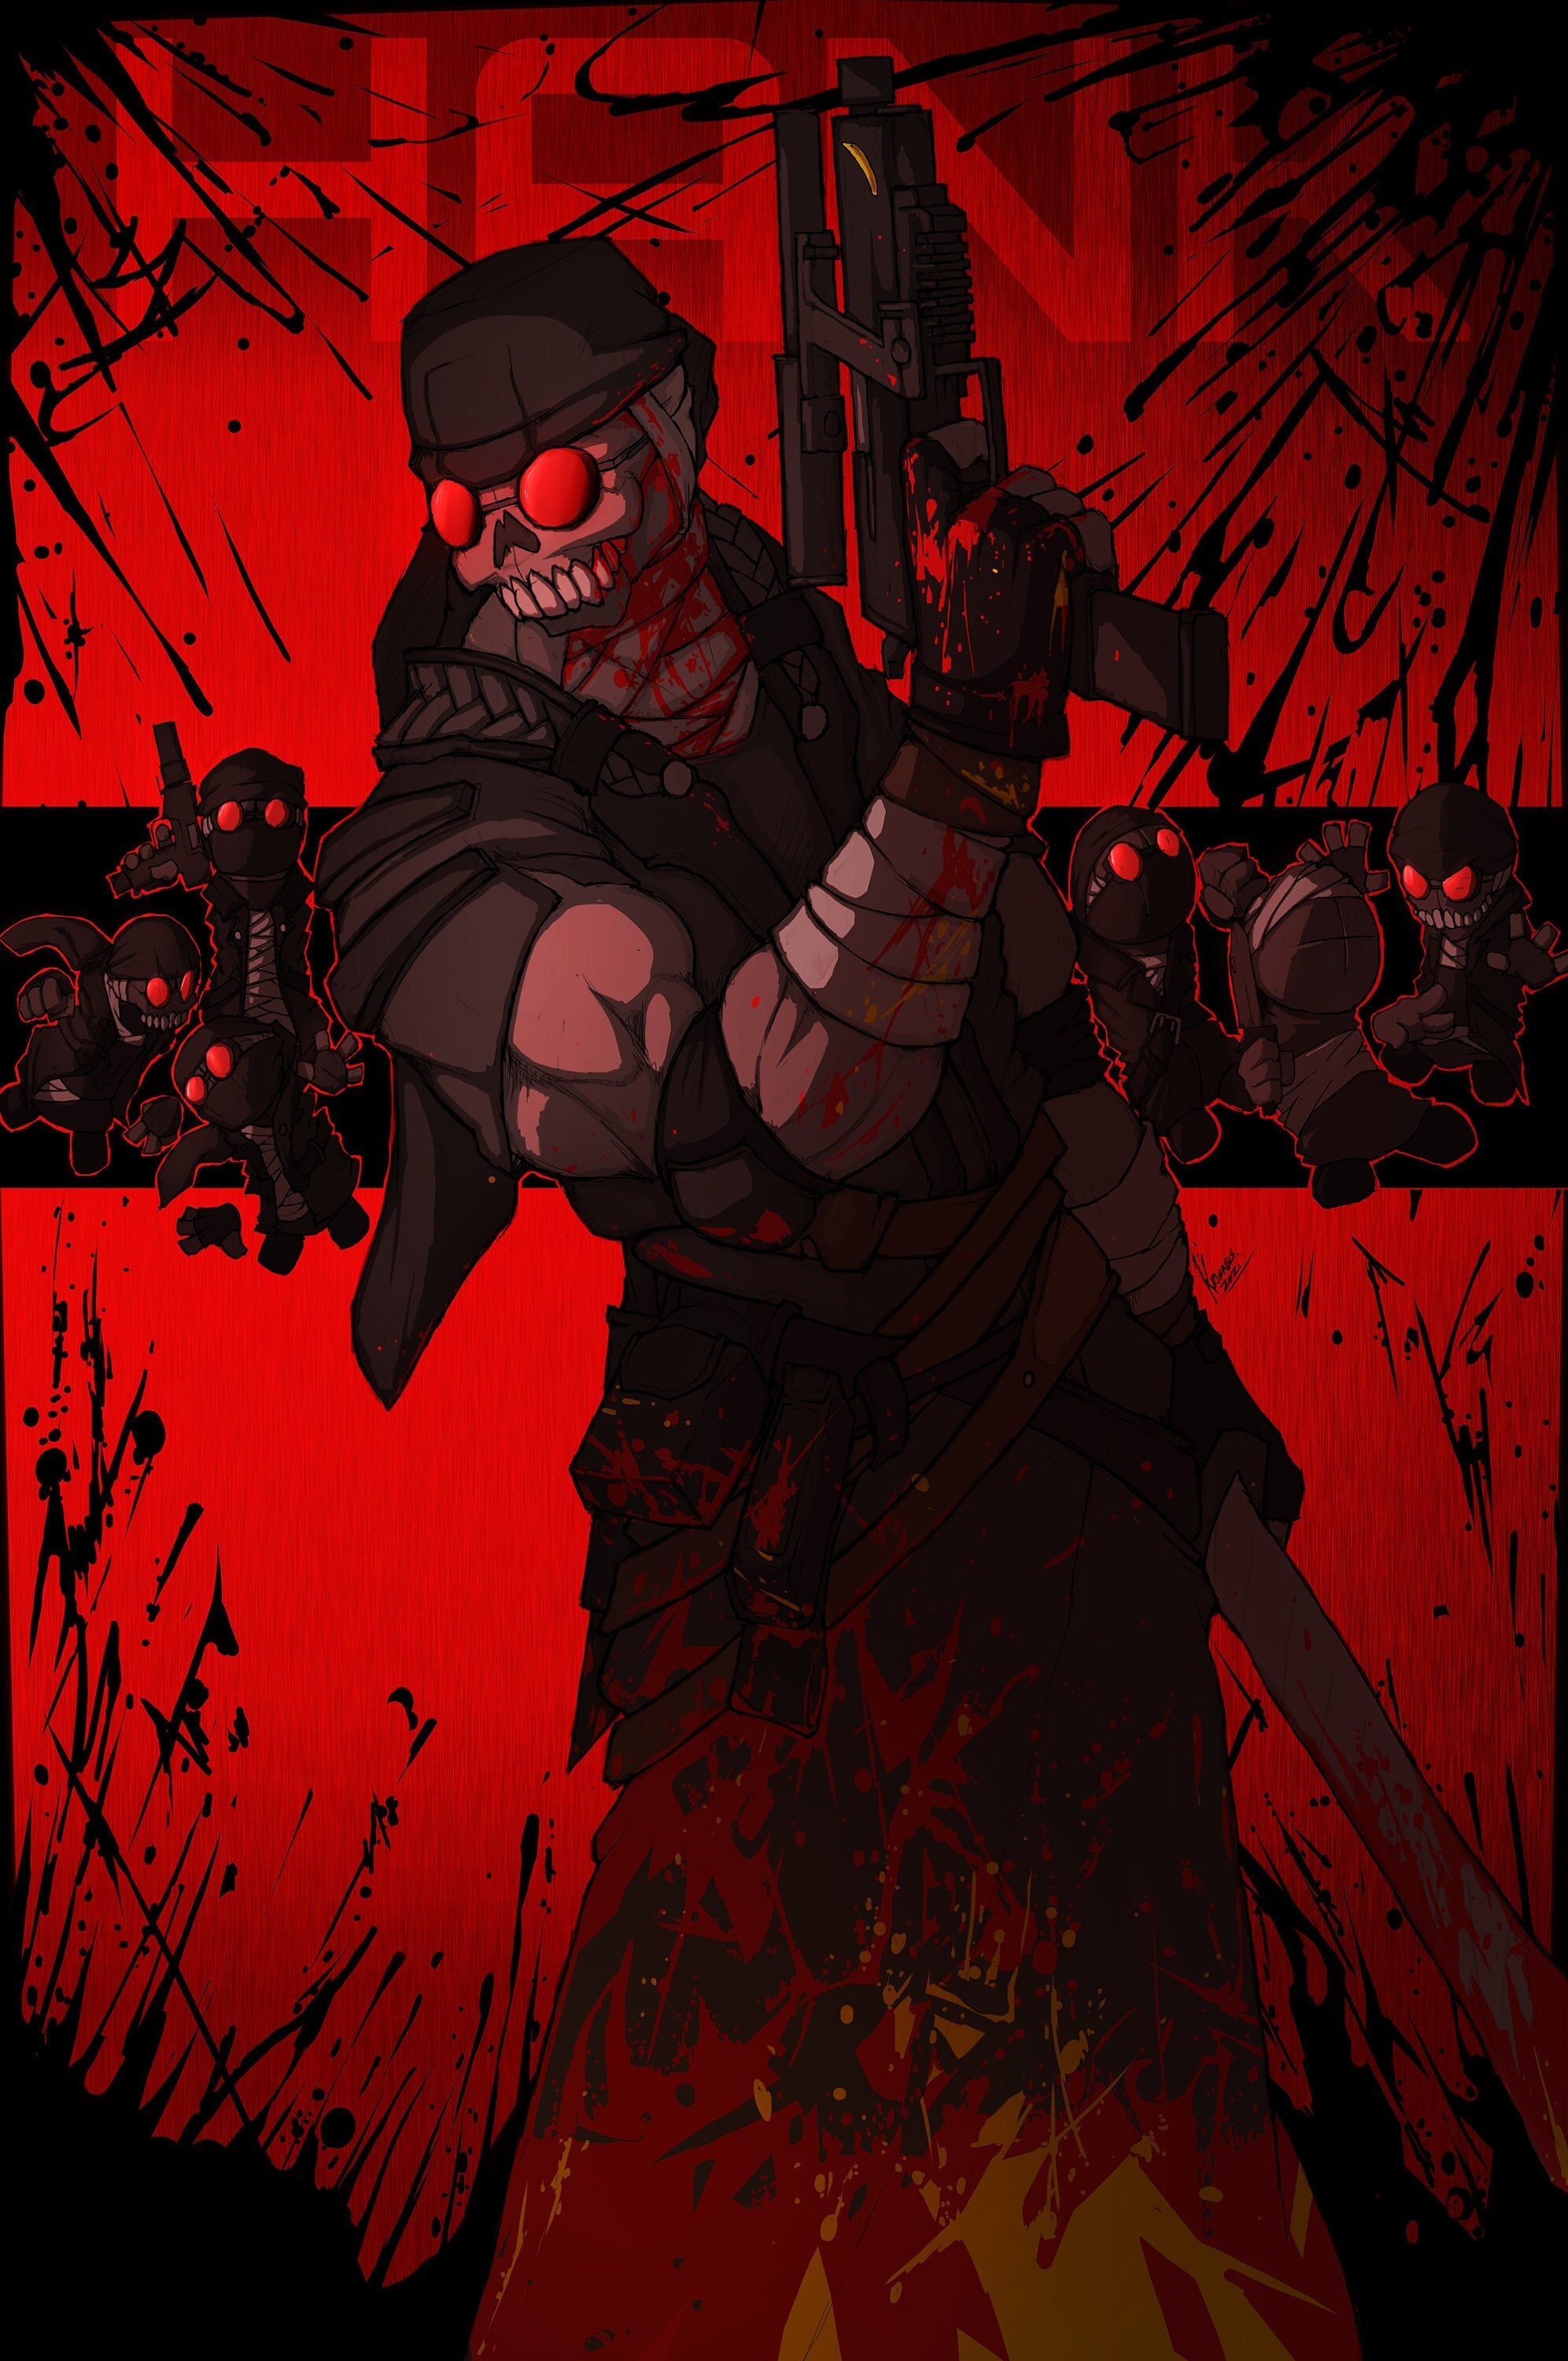 Hank of Madness combat with two guns. - Hank Madness Combat - Posters and  Art Prints